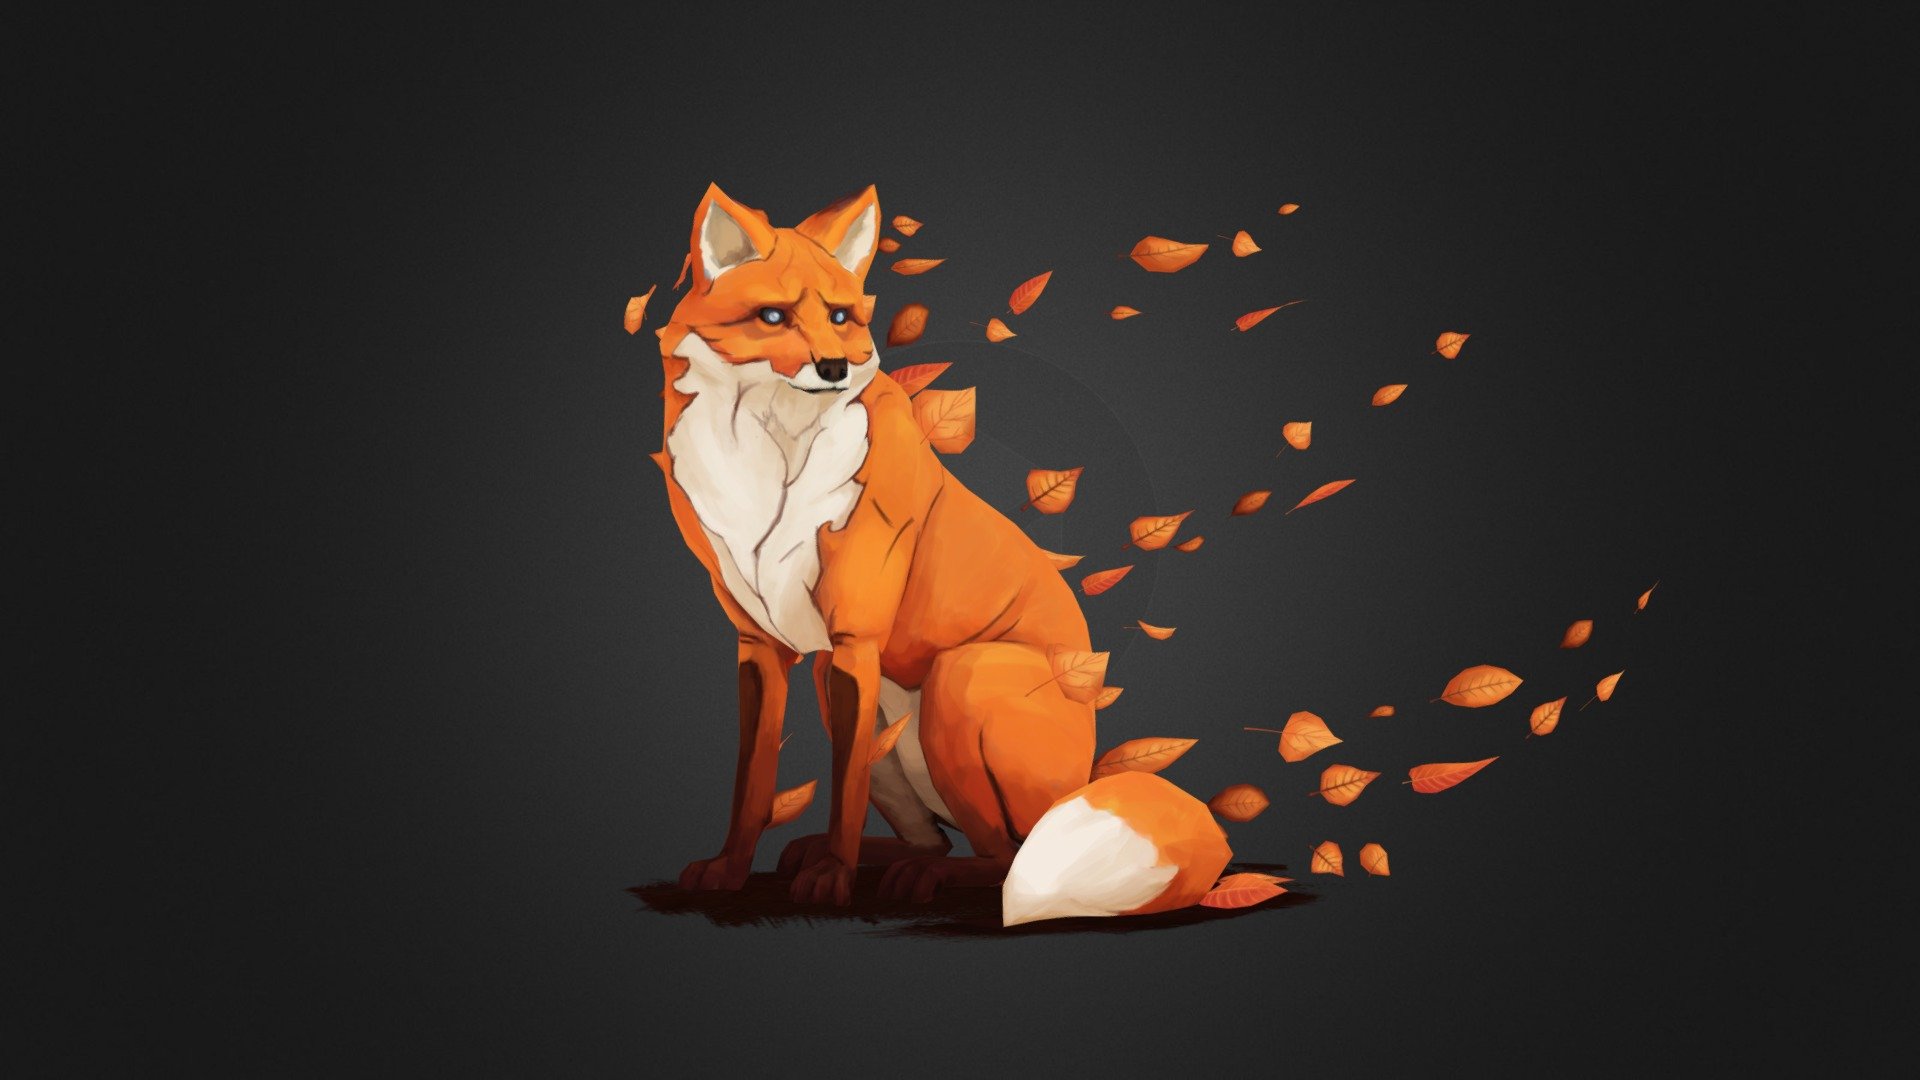 This project was inspired by two artists I really like - particularly, a fox drawing by psdelux, and by miki bencz's excellent 2d/3d style.

I wanted to create psdelux's fox drawing in 3d, in the style of miki bencz's art. However as I continued to iterate on my own version, it evolved into something a bit different 3d model